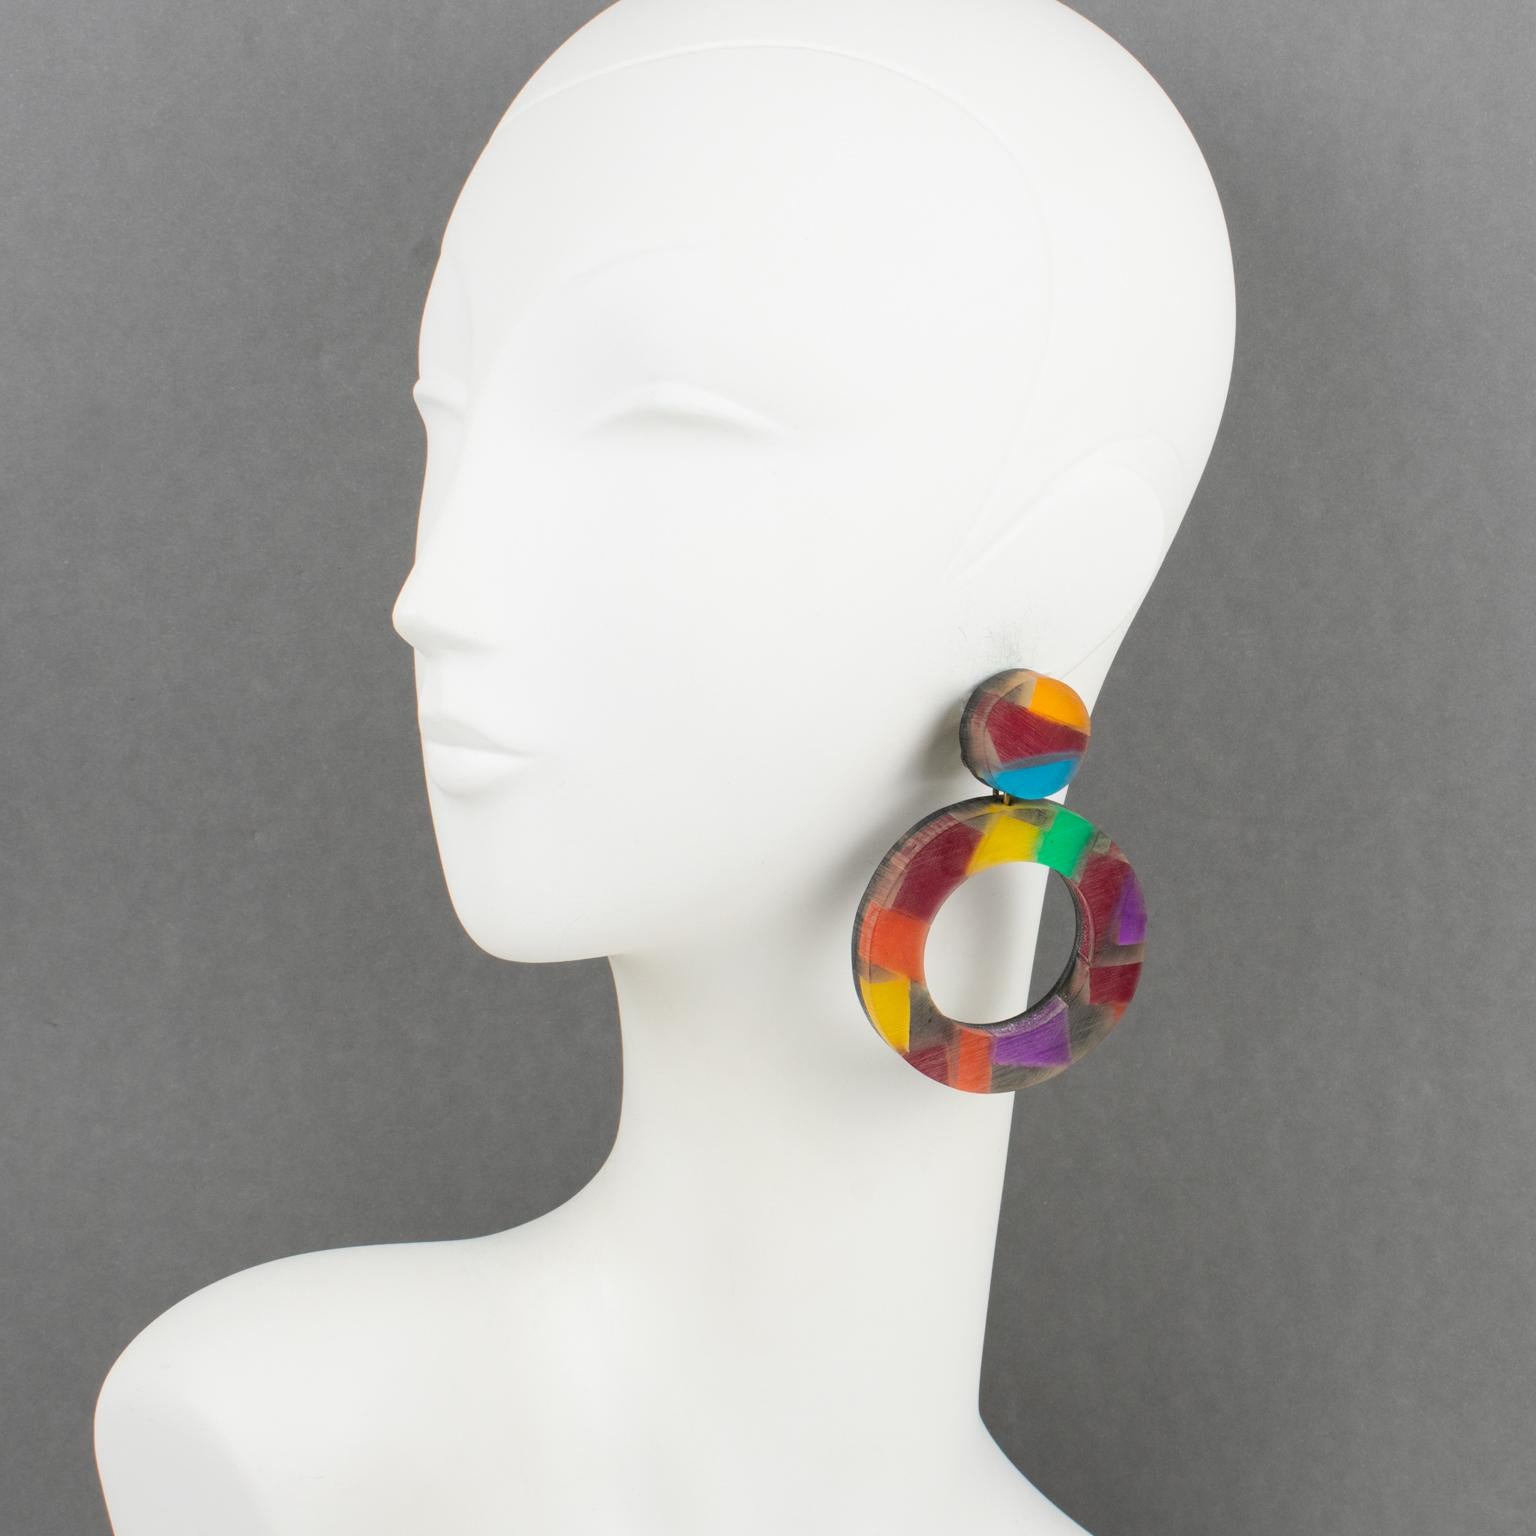 Harriet Bauknight for Kaso designed these stunning Lucite dangling clip-on earrings. They feature an oversized geometric donut shape with a dimensional multilayer black Lucite background with colorful harlequin pattern inclusions with a frosted